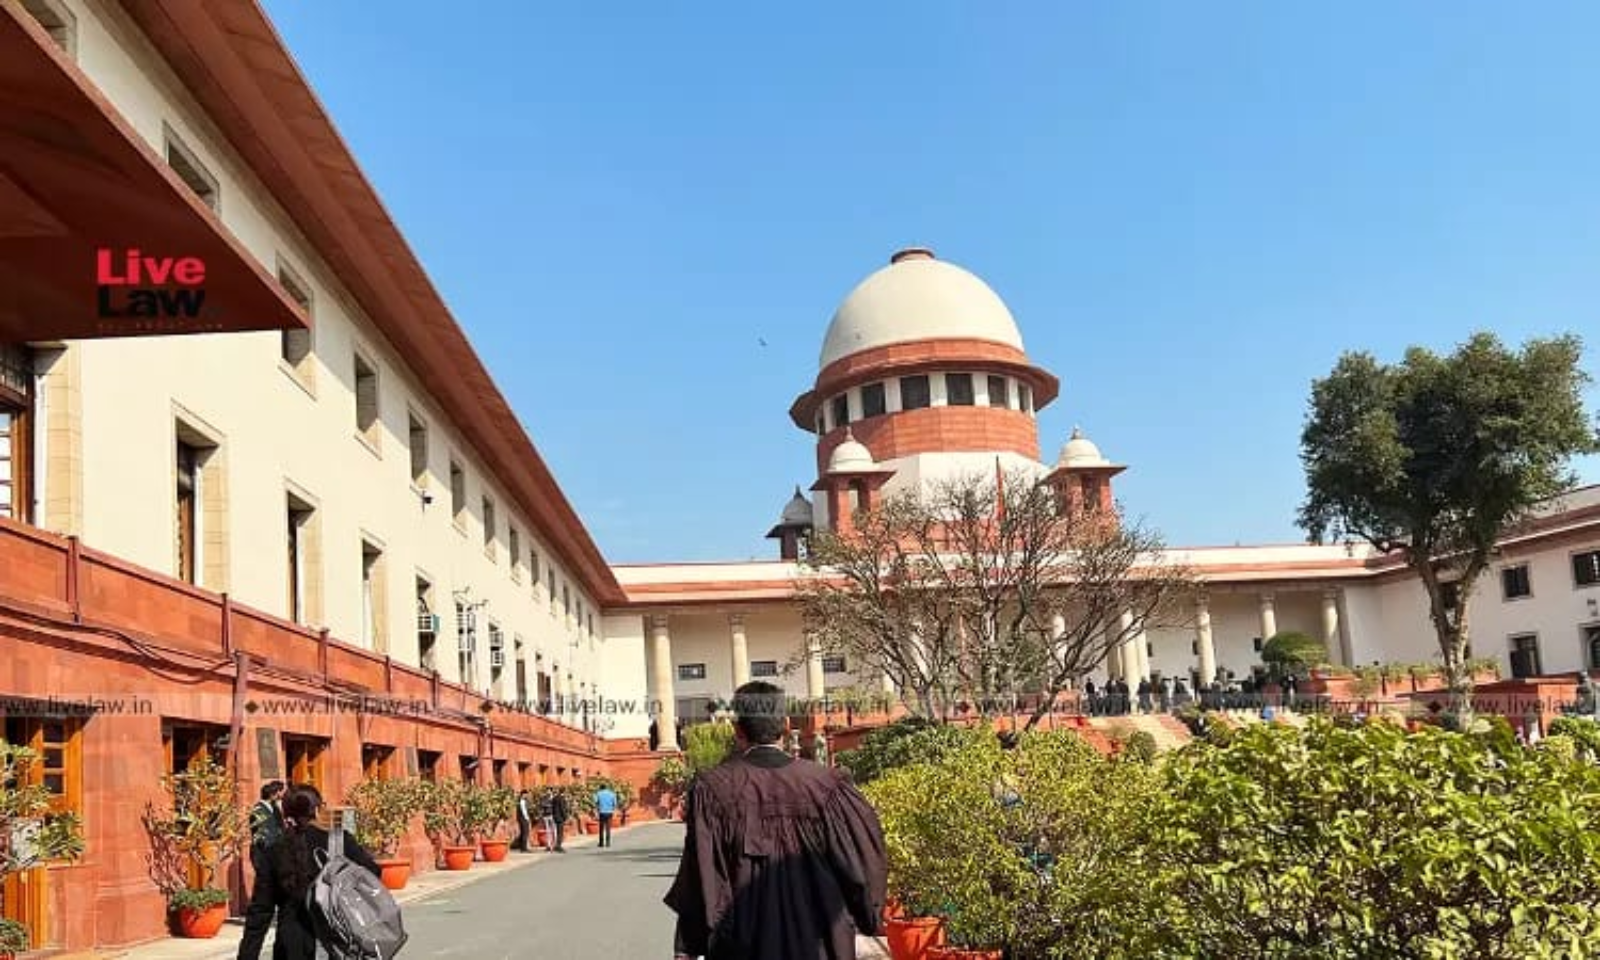 Xxxx Rep Indian Giral - Substantial Progress Made To Prevent Circulation Of Child Porn, Rape Videos  On Social Media': Supreme Court Closes PIL